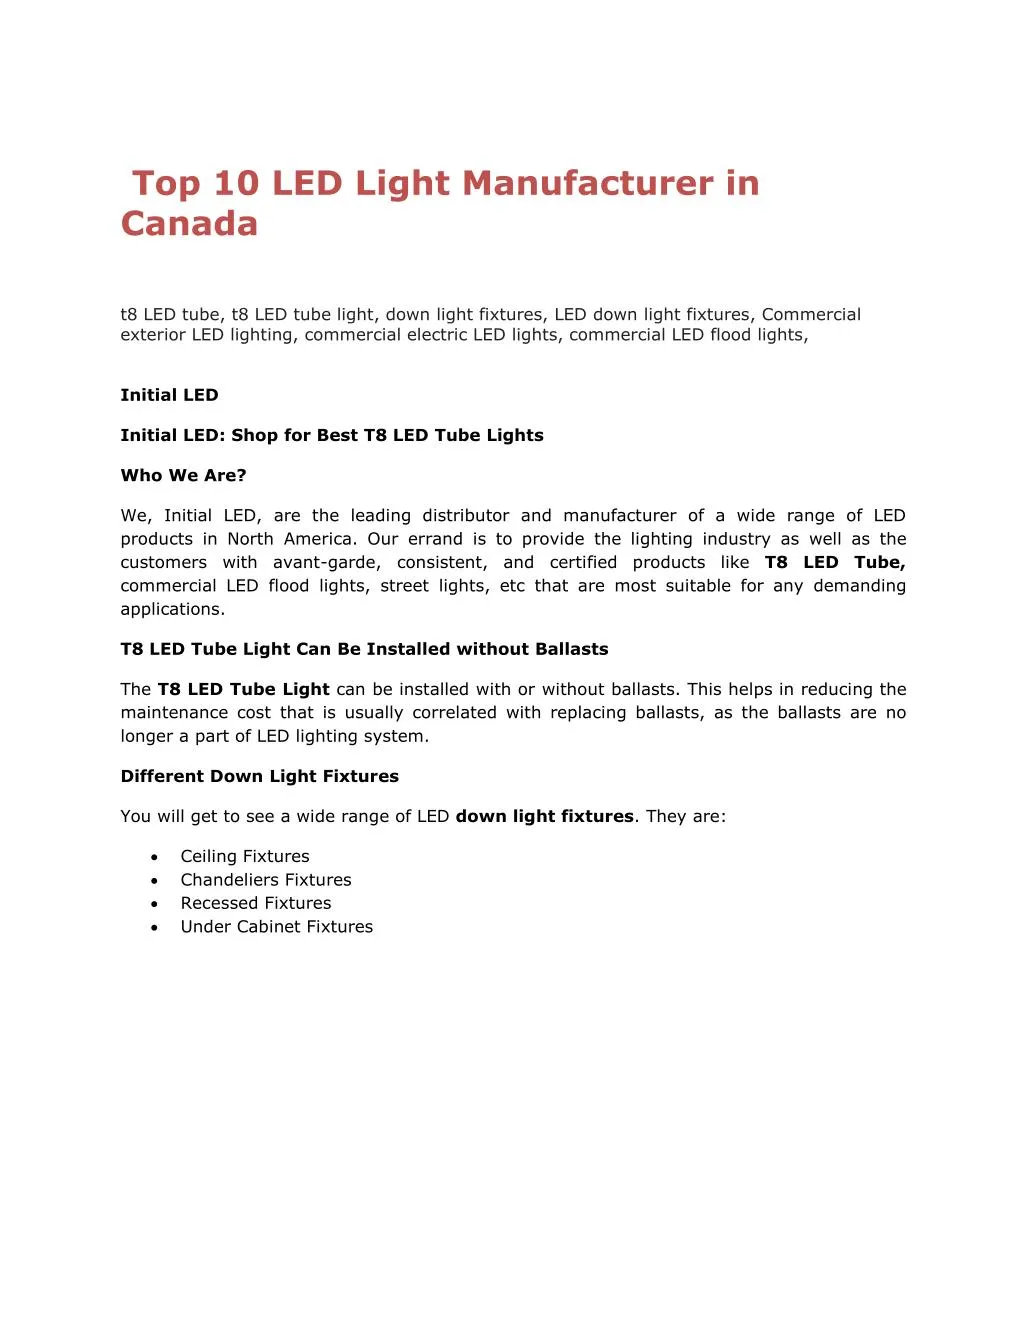 Ppt Top 10 Led Light Manufacturer In Canada Powerpoint